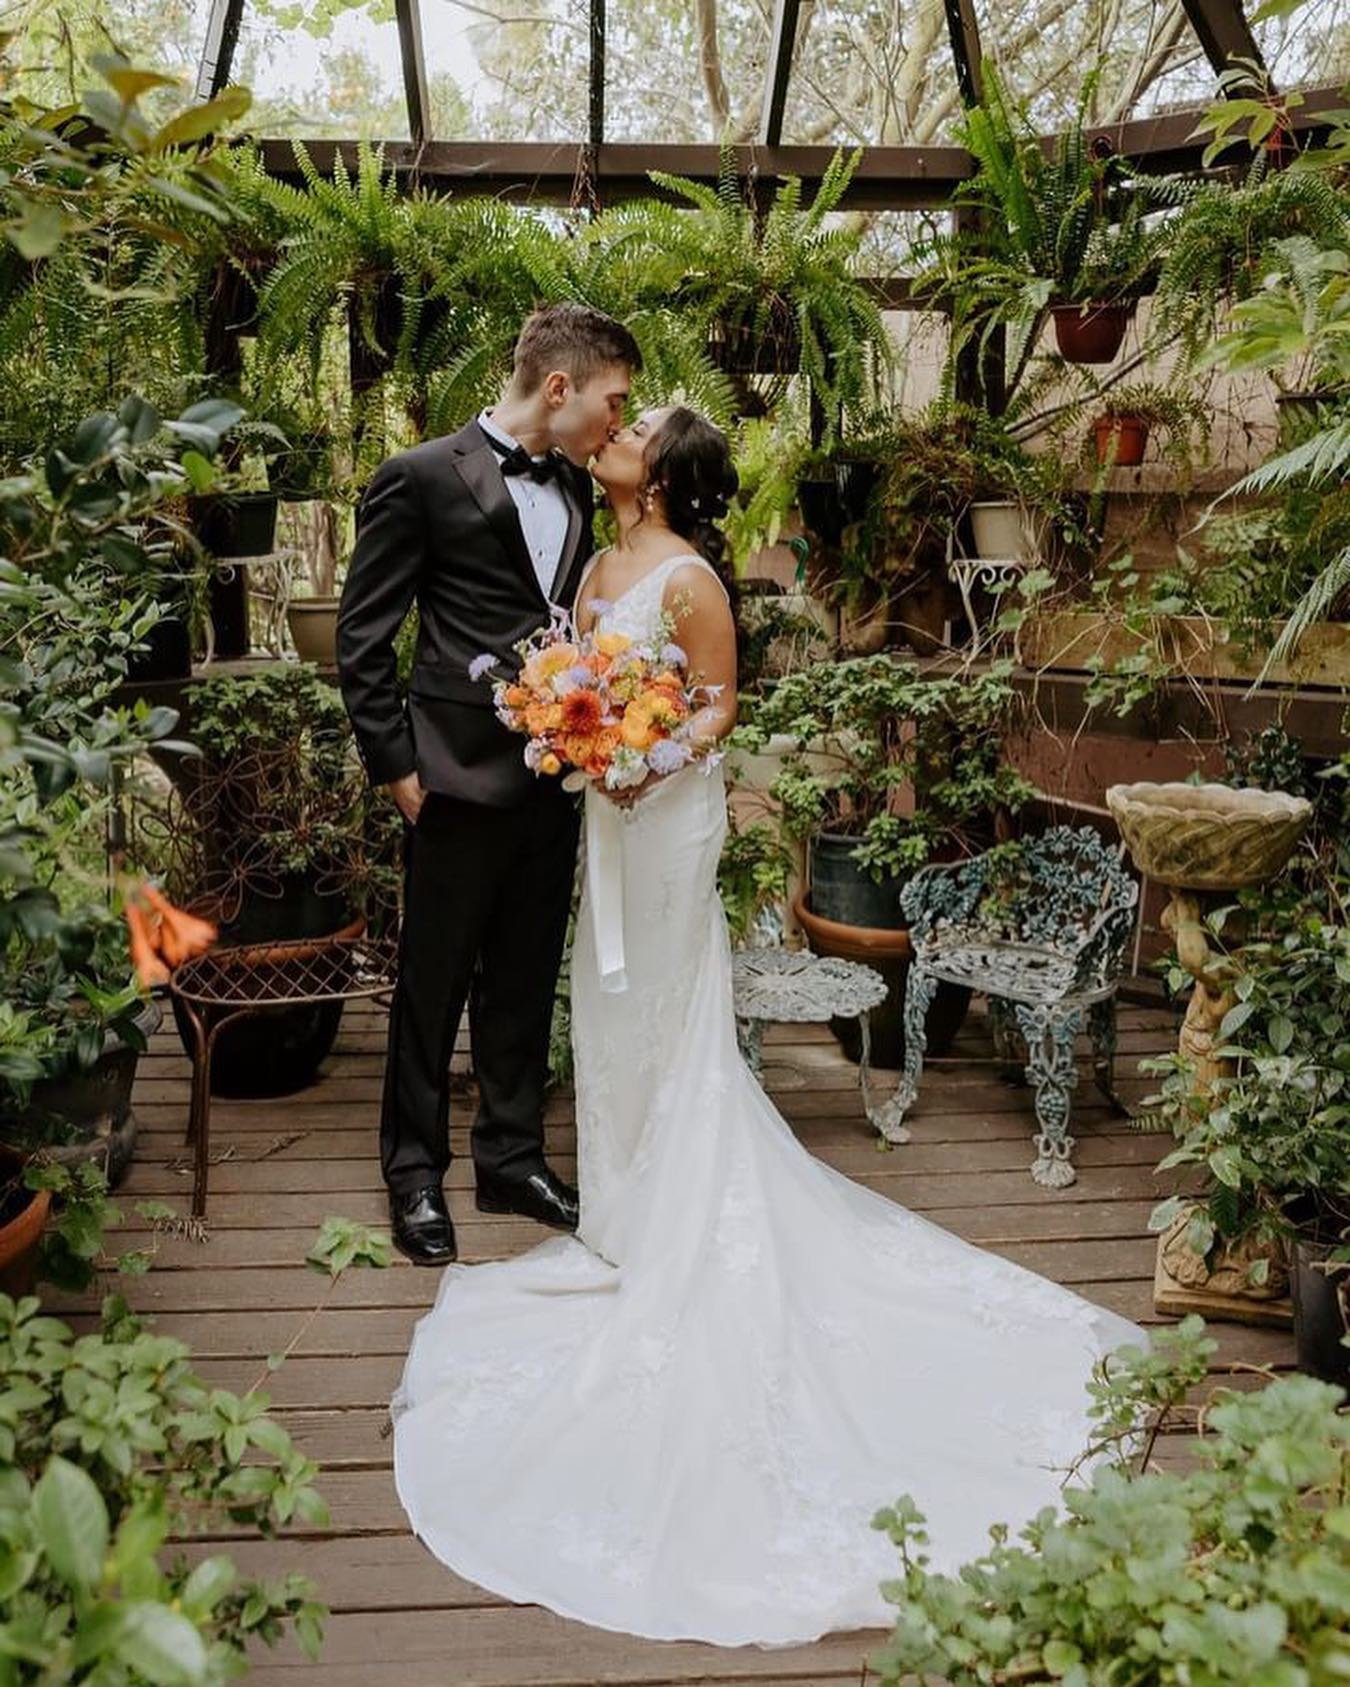 These photos are making our hearts explode!! This #MemoryMonday is dedicated to @hoorayitsmarey &lsquo;s recent nuptials!🌿🤍🌸 We can feel the love, romance, and fairytale-feels radiating through these gorgeous pics! 
@parallel33photography 
&bull;
